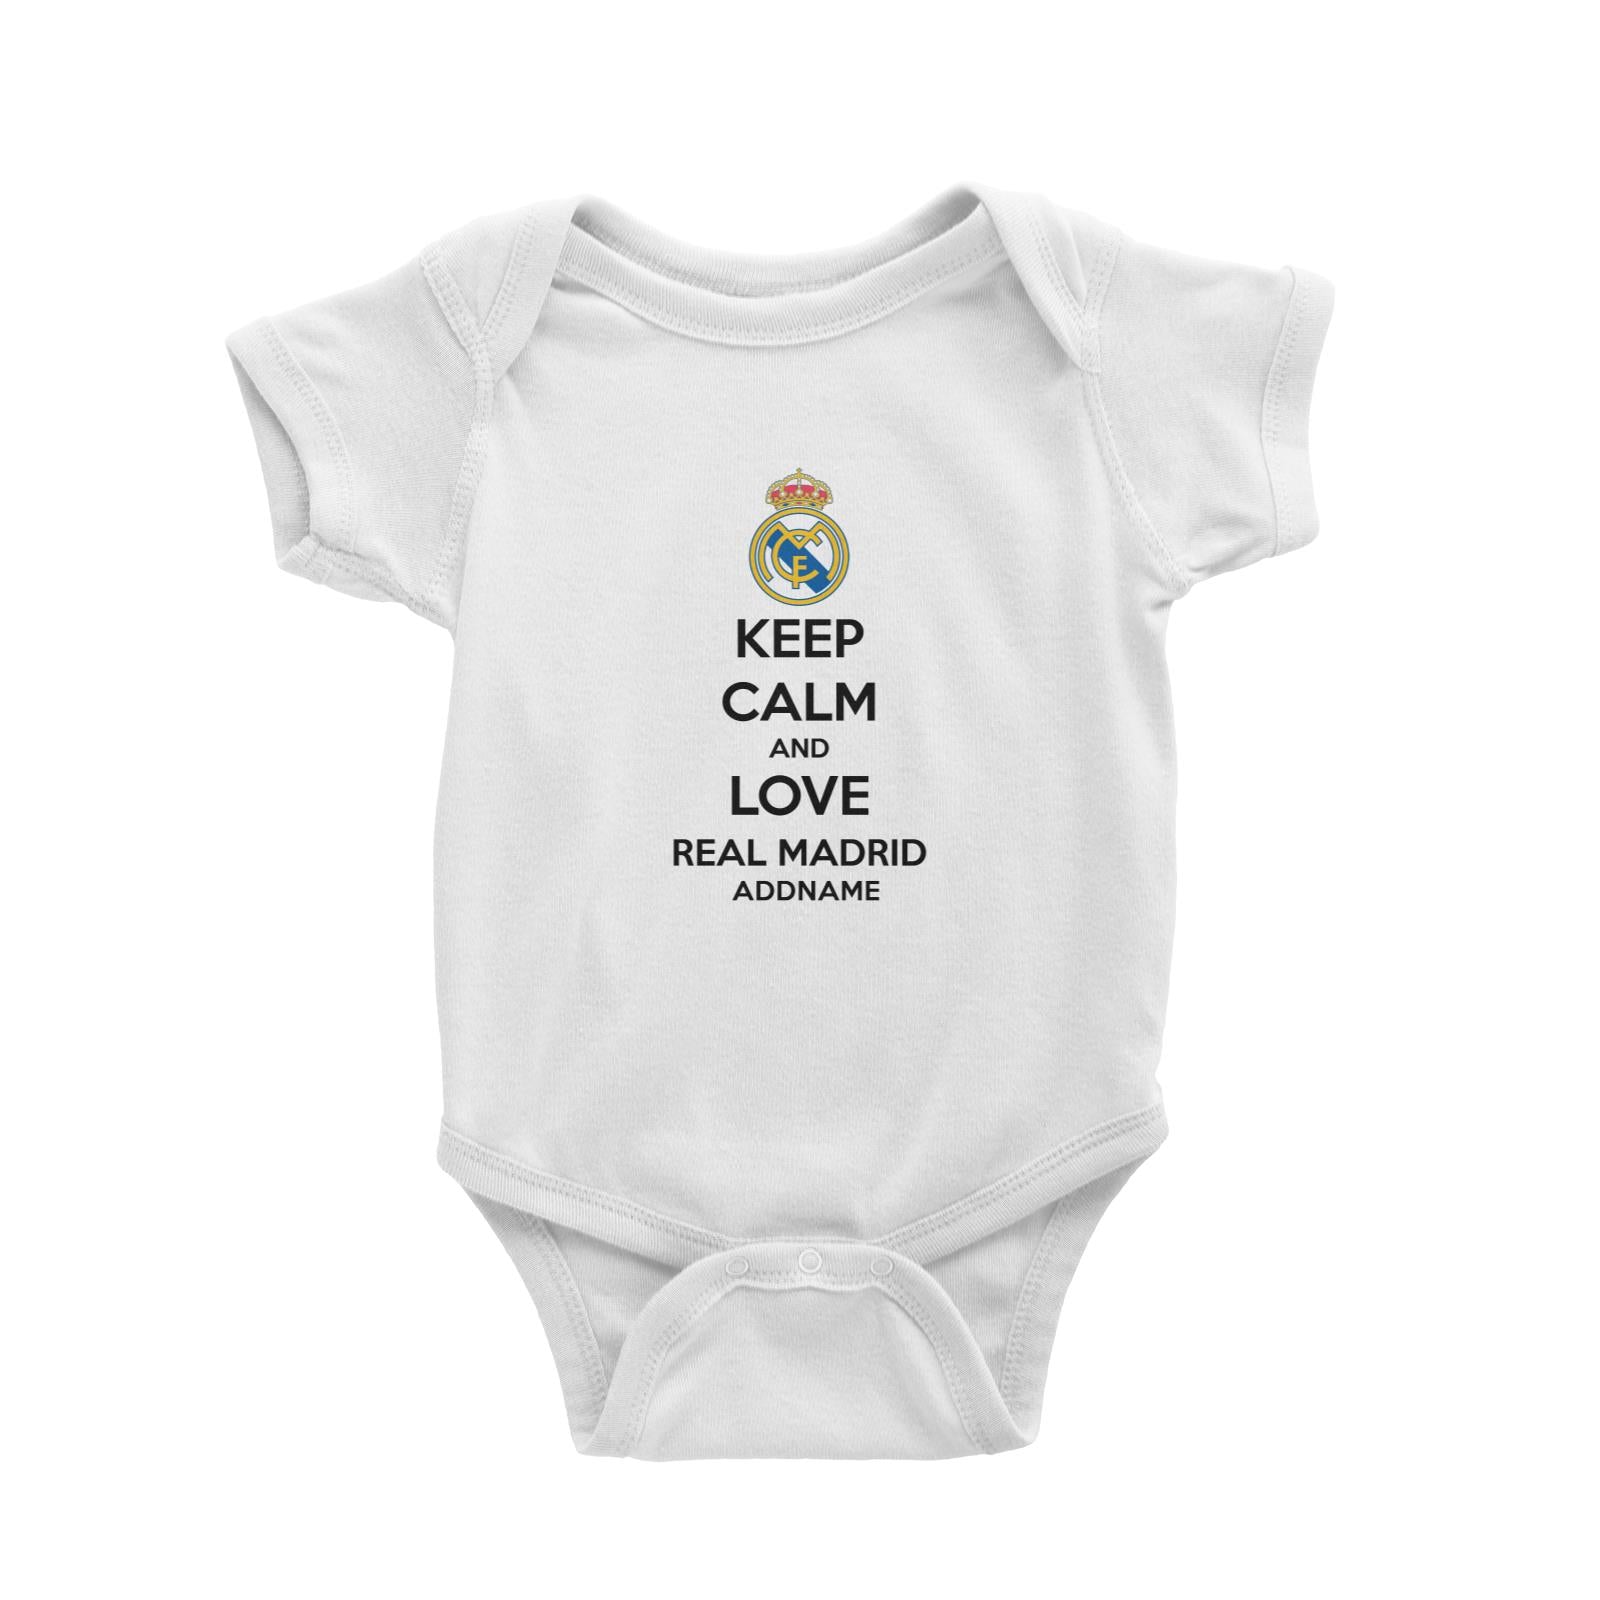 Real Madrid Football Keep Calm And Love Series Addname Baby Romper